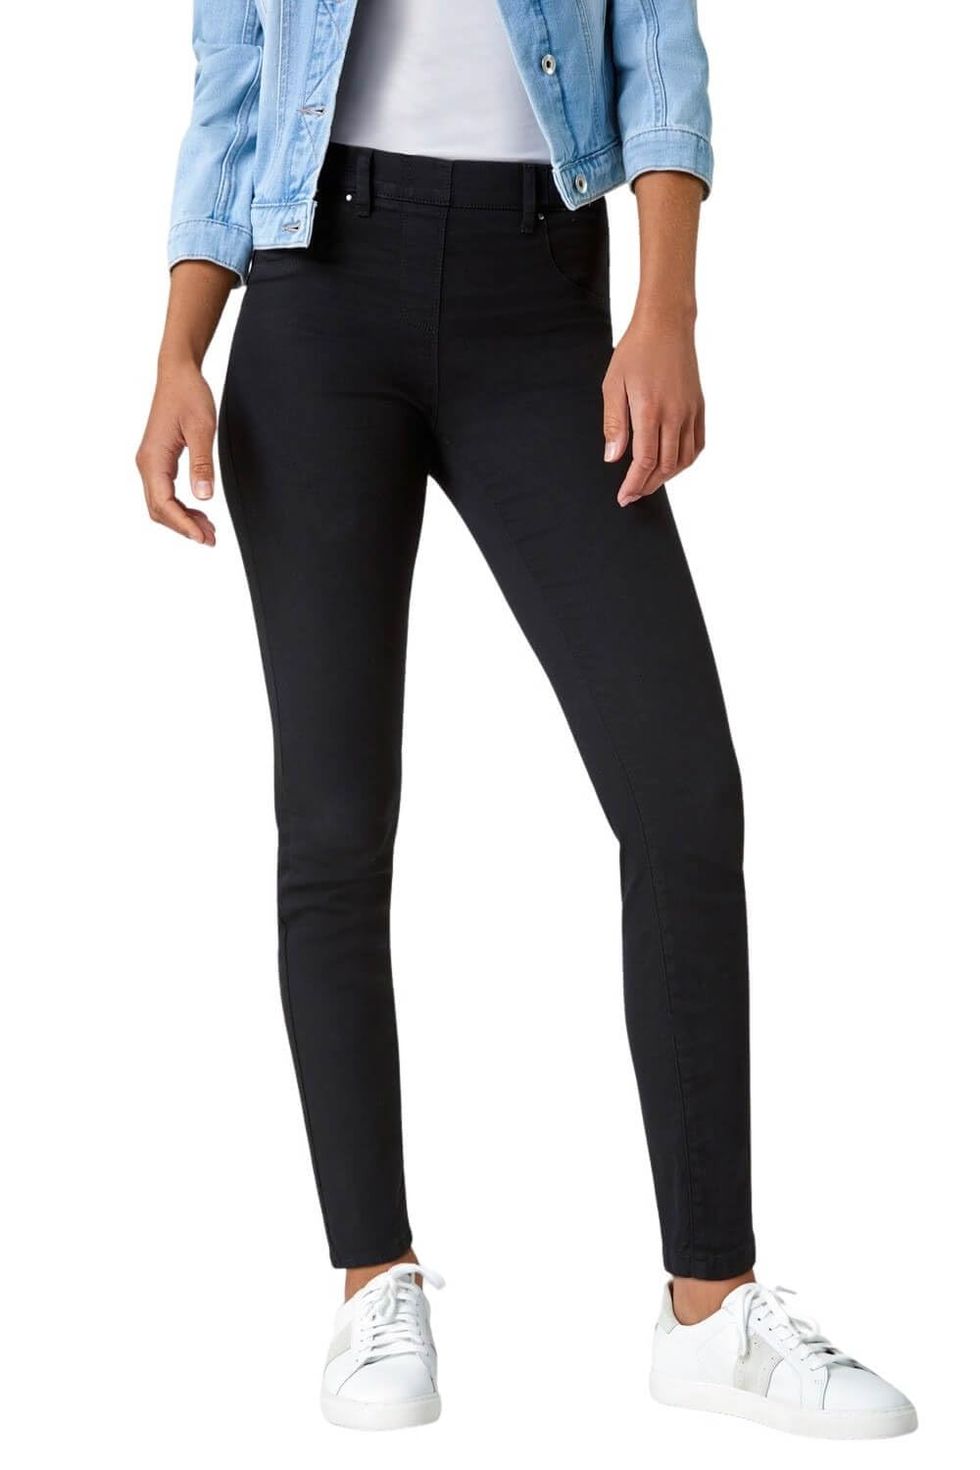 Women's Stylish Stretchable Cotton Jeggings Slim Fit Ankle Length